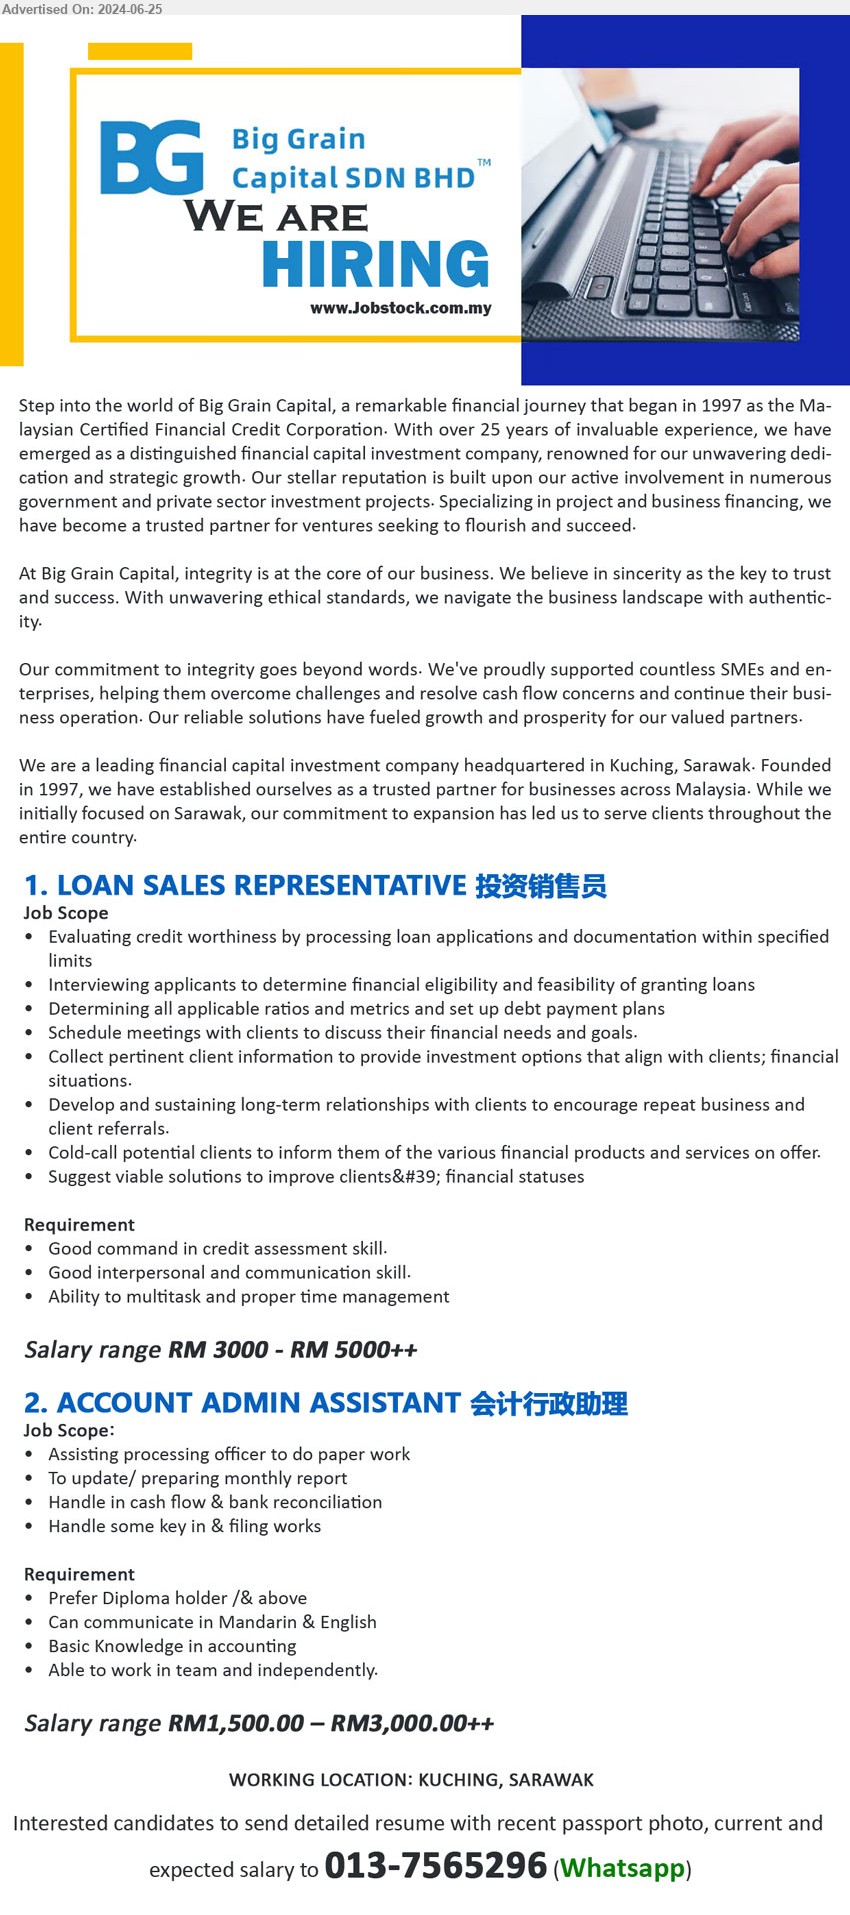 BIG GRAIN CAPITAL SDN BHD - 1. LOAN SALES REPRESENTATIVE 投资销售员 (Kuching), RM 3000 - RM 5000++, Good command in credit assessment skill...
2. ACCOUNT ADMIN ASSISTANT 会计行政助理 (Kuching), RM1,500.00 – RM3,000.00++, Diploma holder /& above, Basic Knowledge in accounting...
Whatsapp 013-7565296